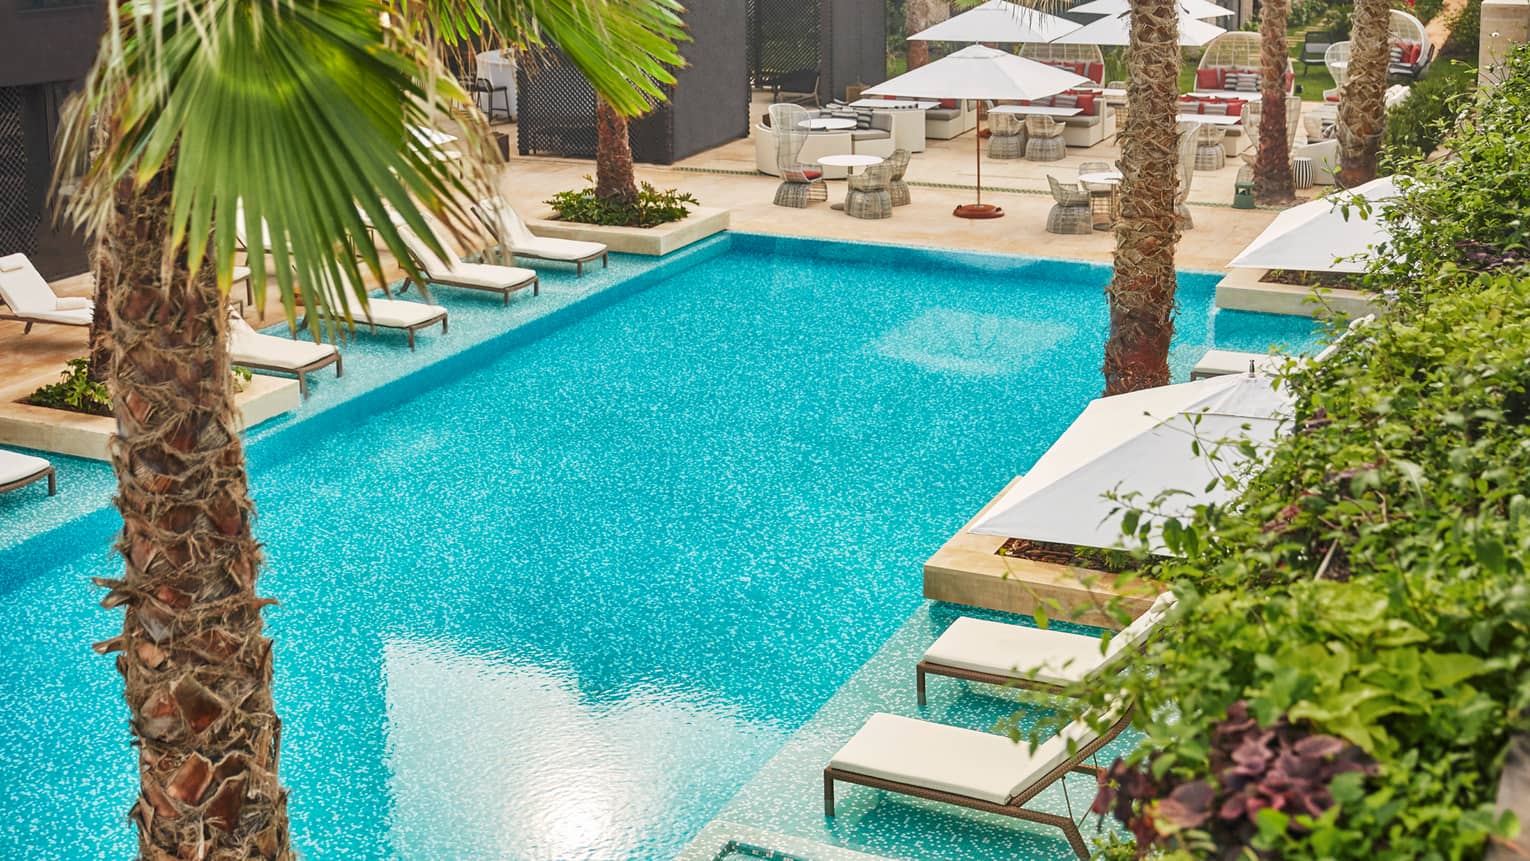 Blue outdoor swimming pool lined by white lounge chairs, umbrellas, palm trees